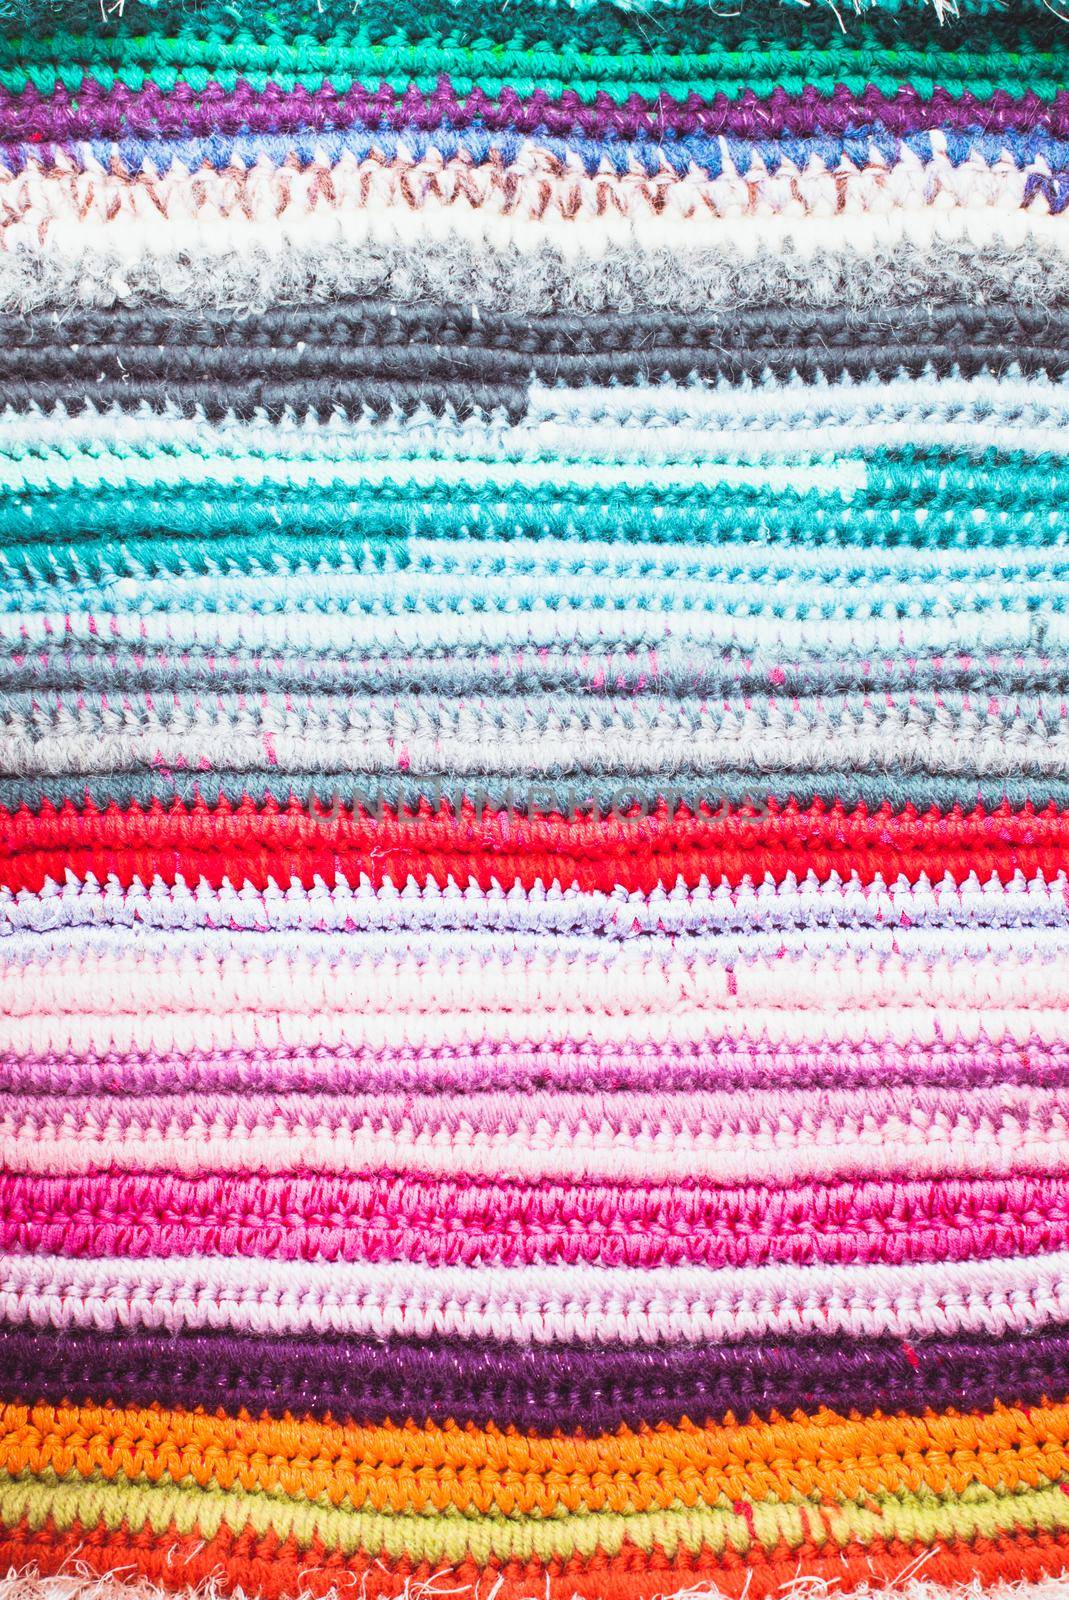 Crochet background with different colors, for design